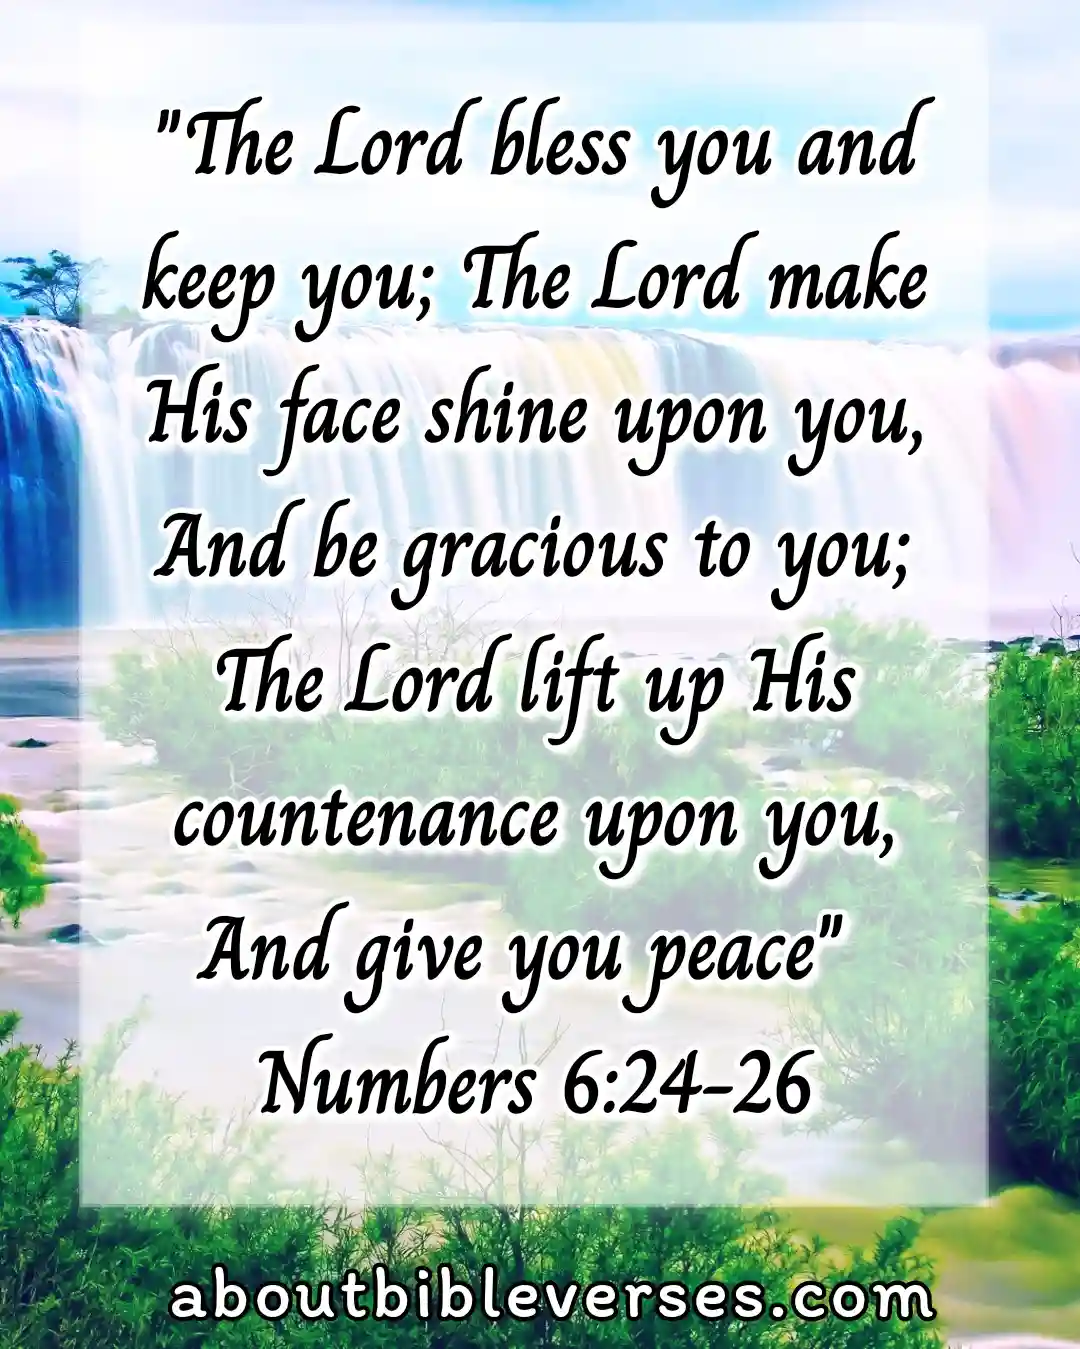 Wednesday Morning Bible Verses (Numbers 6:24-26)